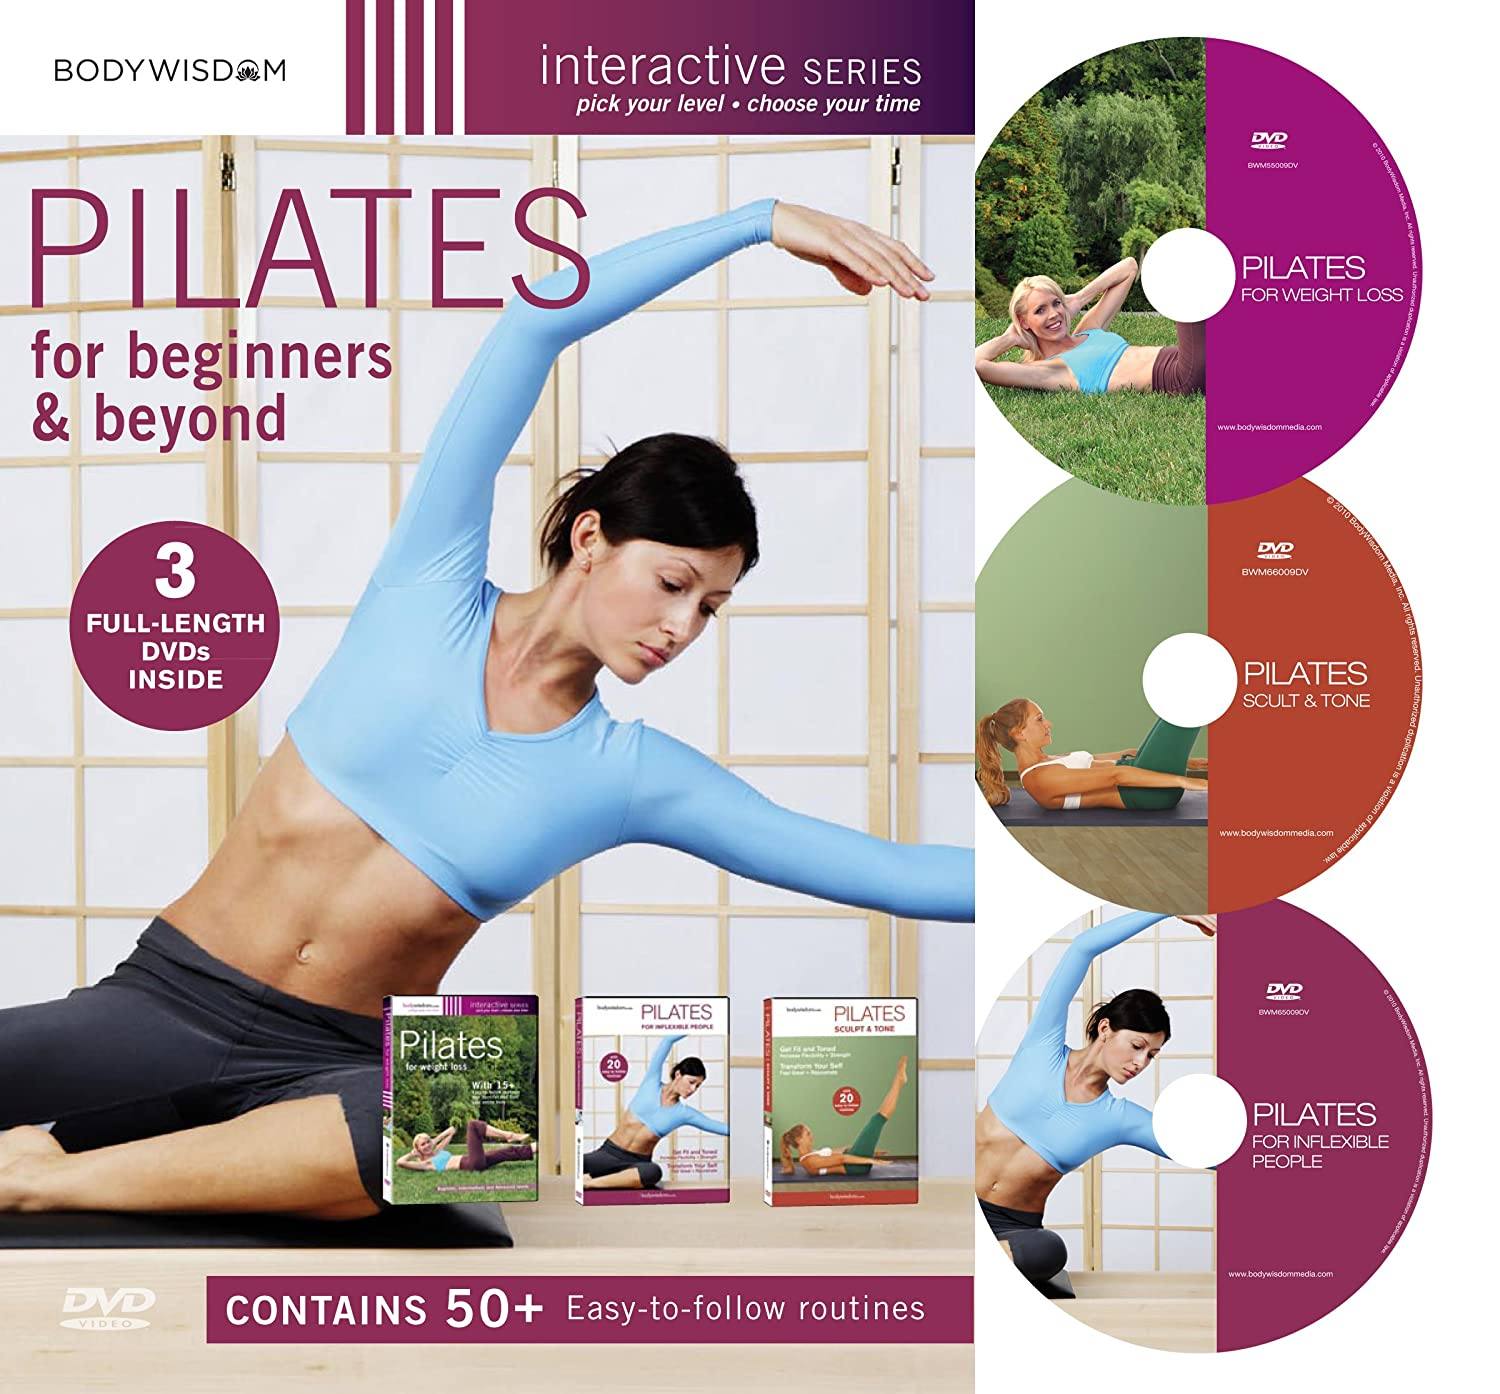 USED - LIKE NEW] Pilates for Beginners & Beyond (3-DVD Set)